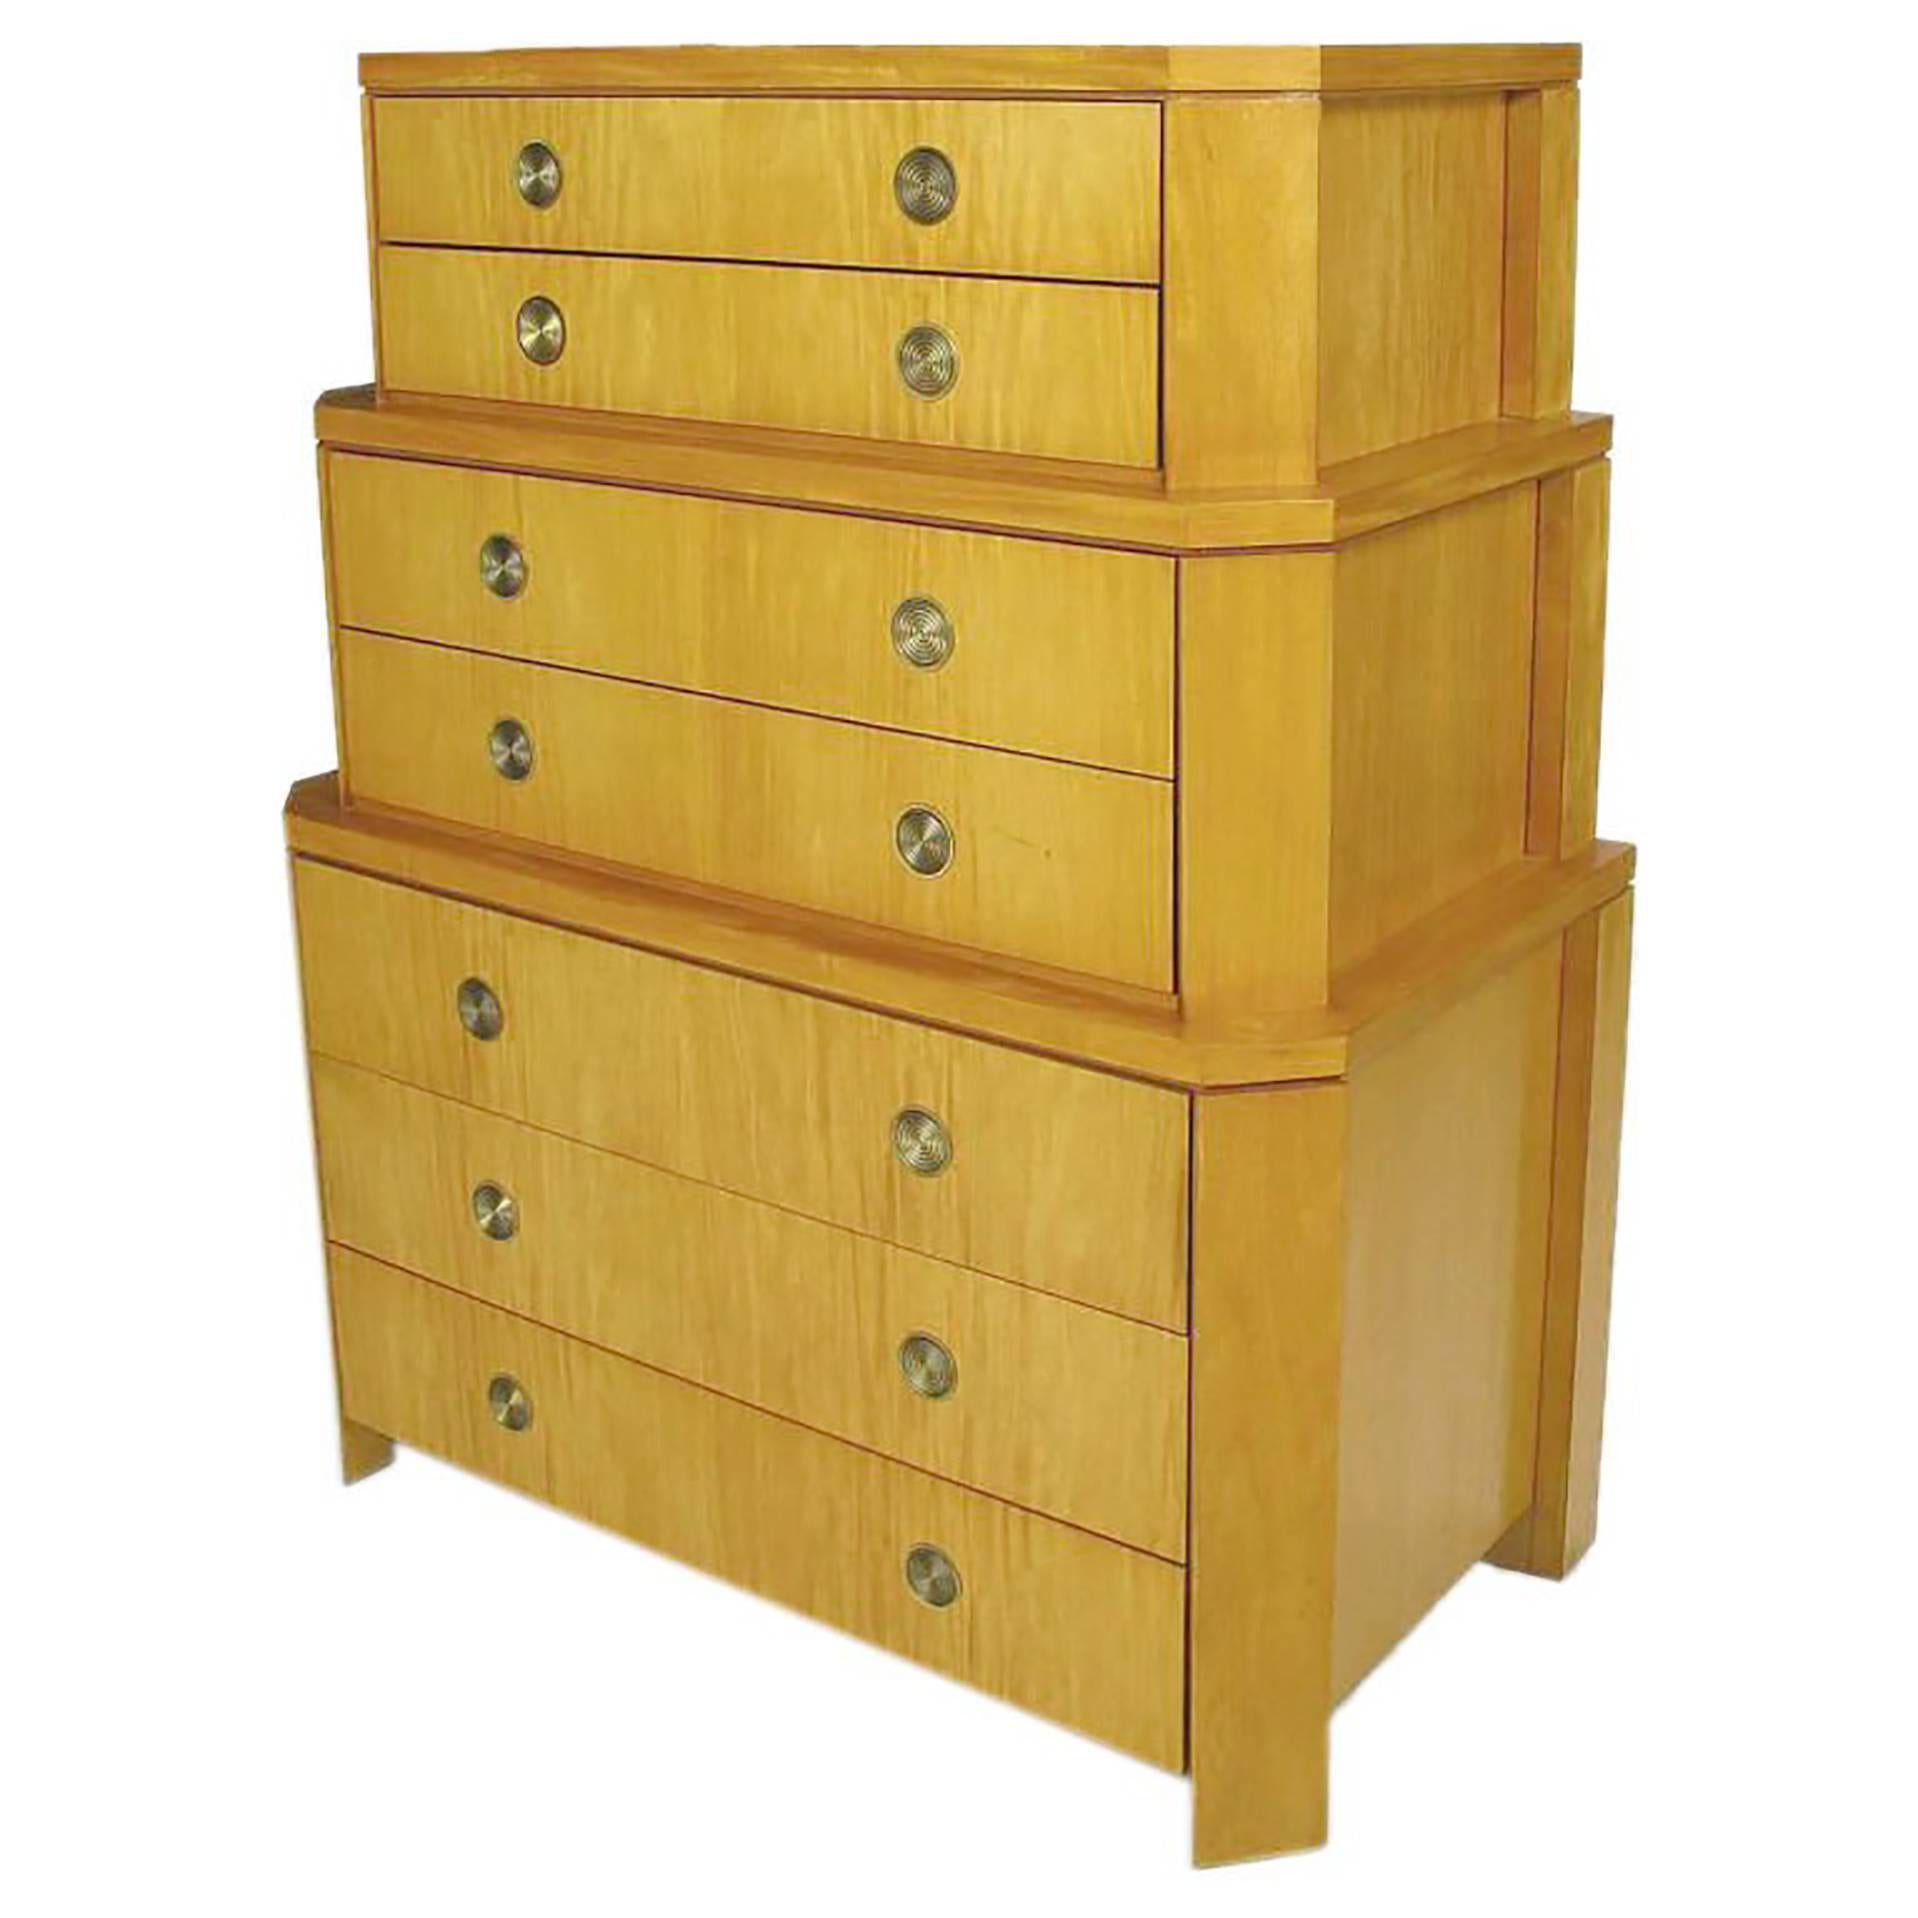 From the only collection of residential furniture by renowned San Francisco designer Charles Pfister (1940-1990), this three section chest with canted corners was offered through Baker for only a short period. The concentric pulls are pivoting brass